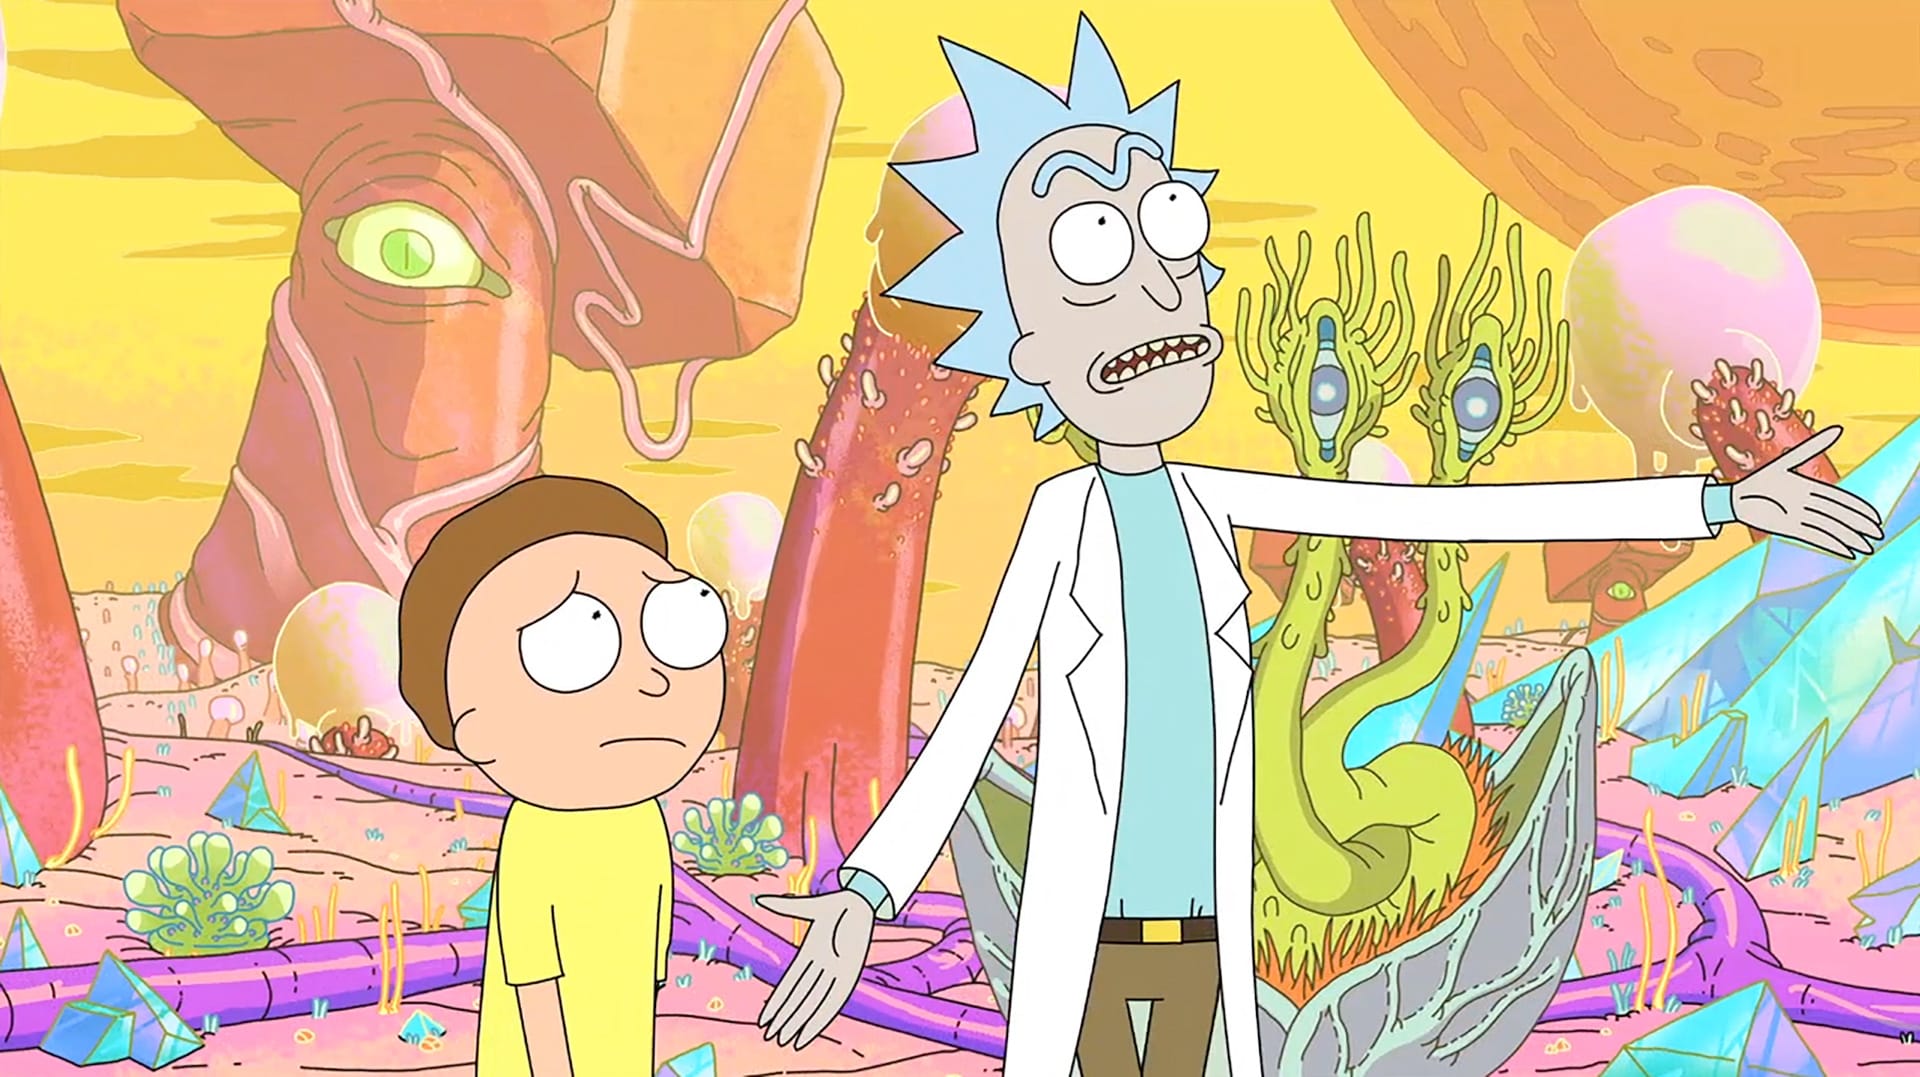 “Rick and Morty” Fans Will Now Finally, Finally Taste the Szechuan Sauce